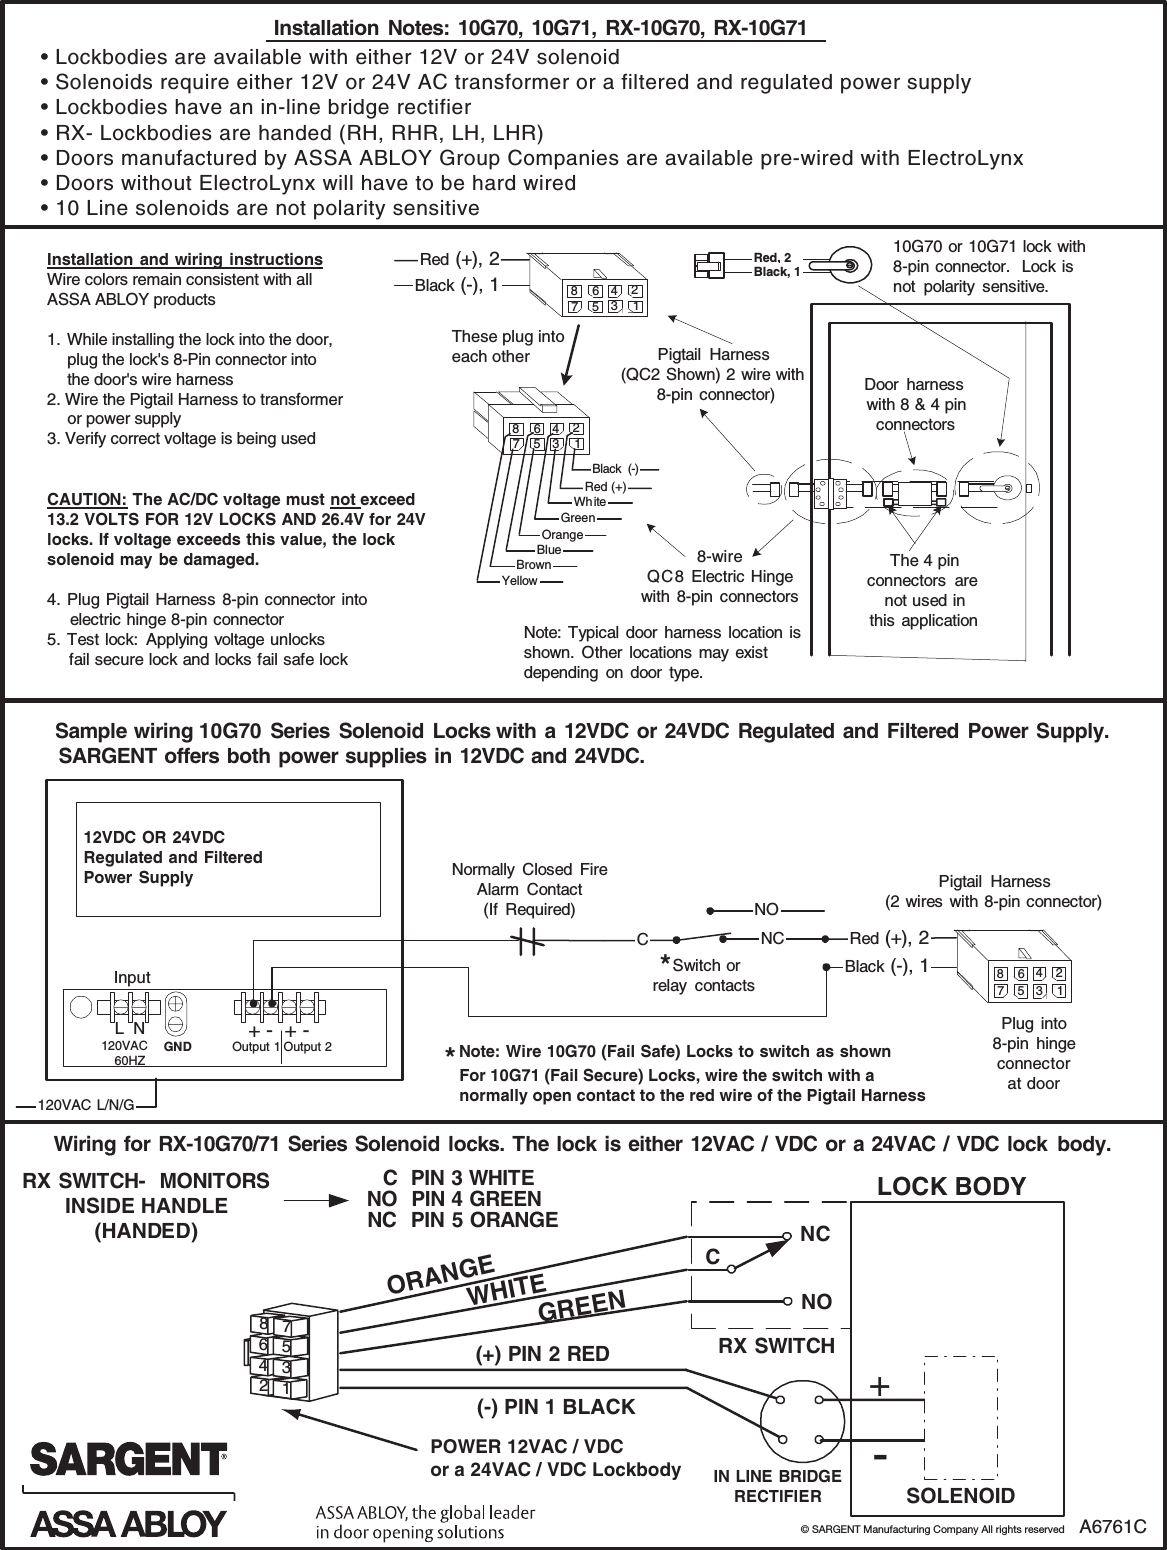 Page 2 of 2 - Sargent A6761C Installation Instructions For 10G70 & 10G71 Electro-Mechanical Bored Lock 1 3/4 Door With Elect